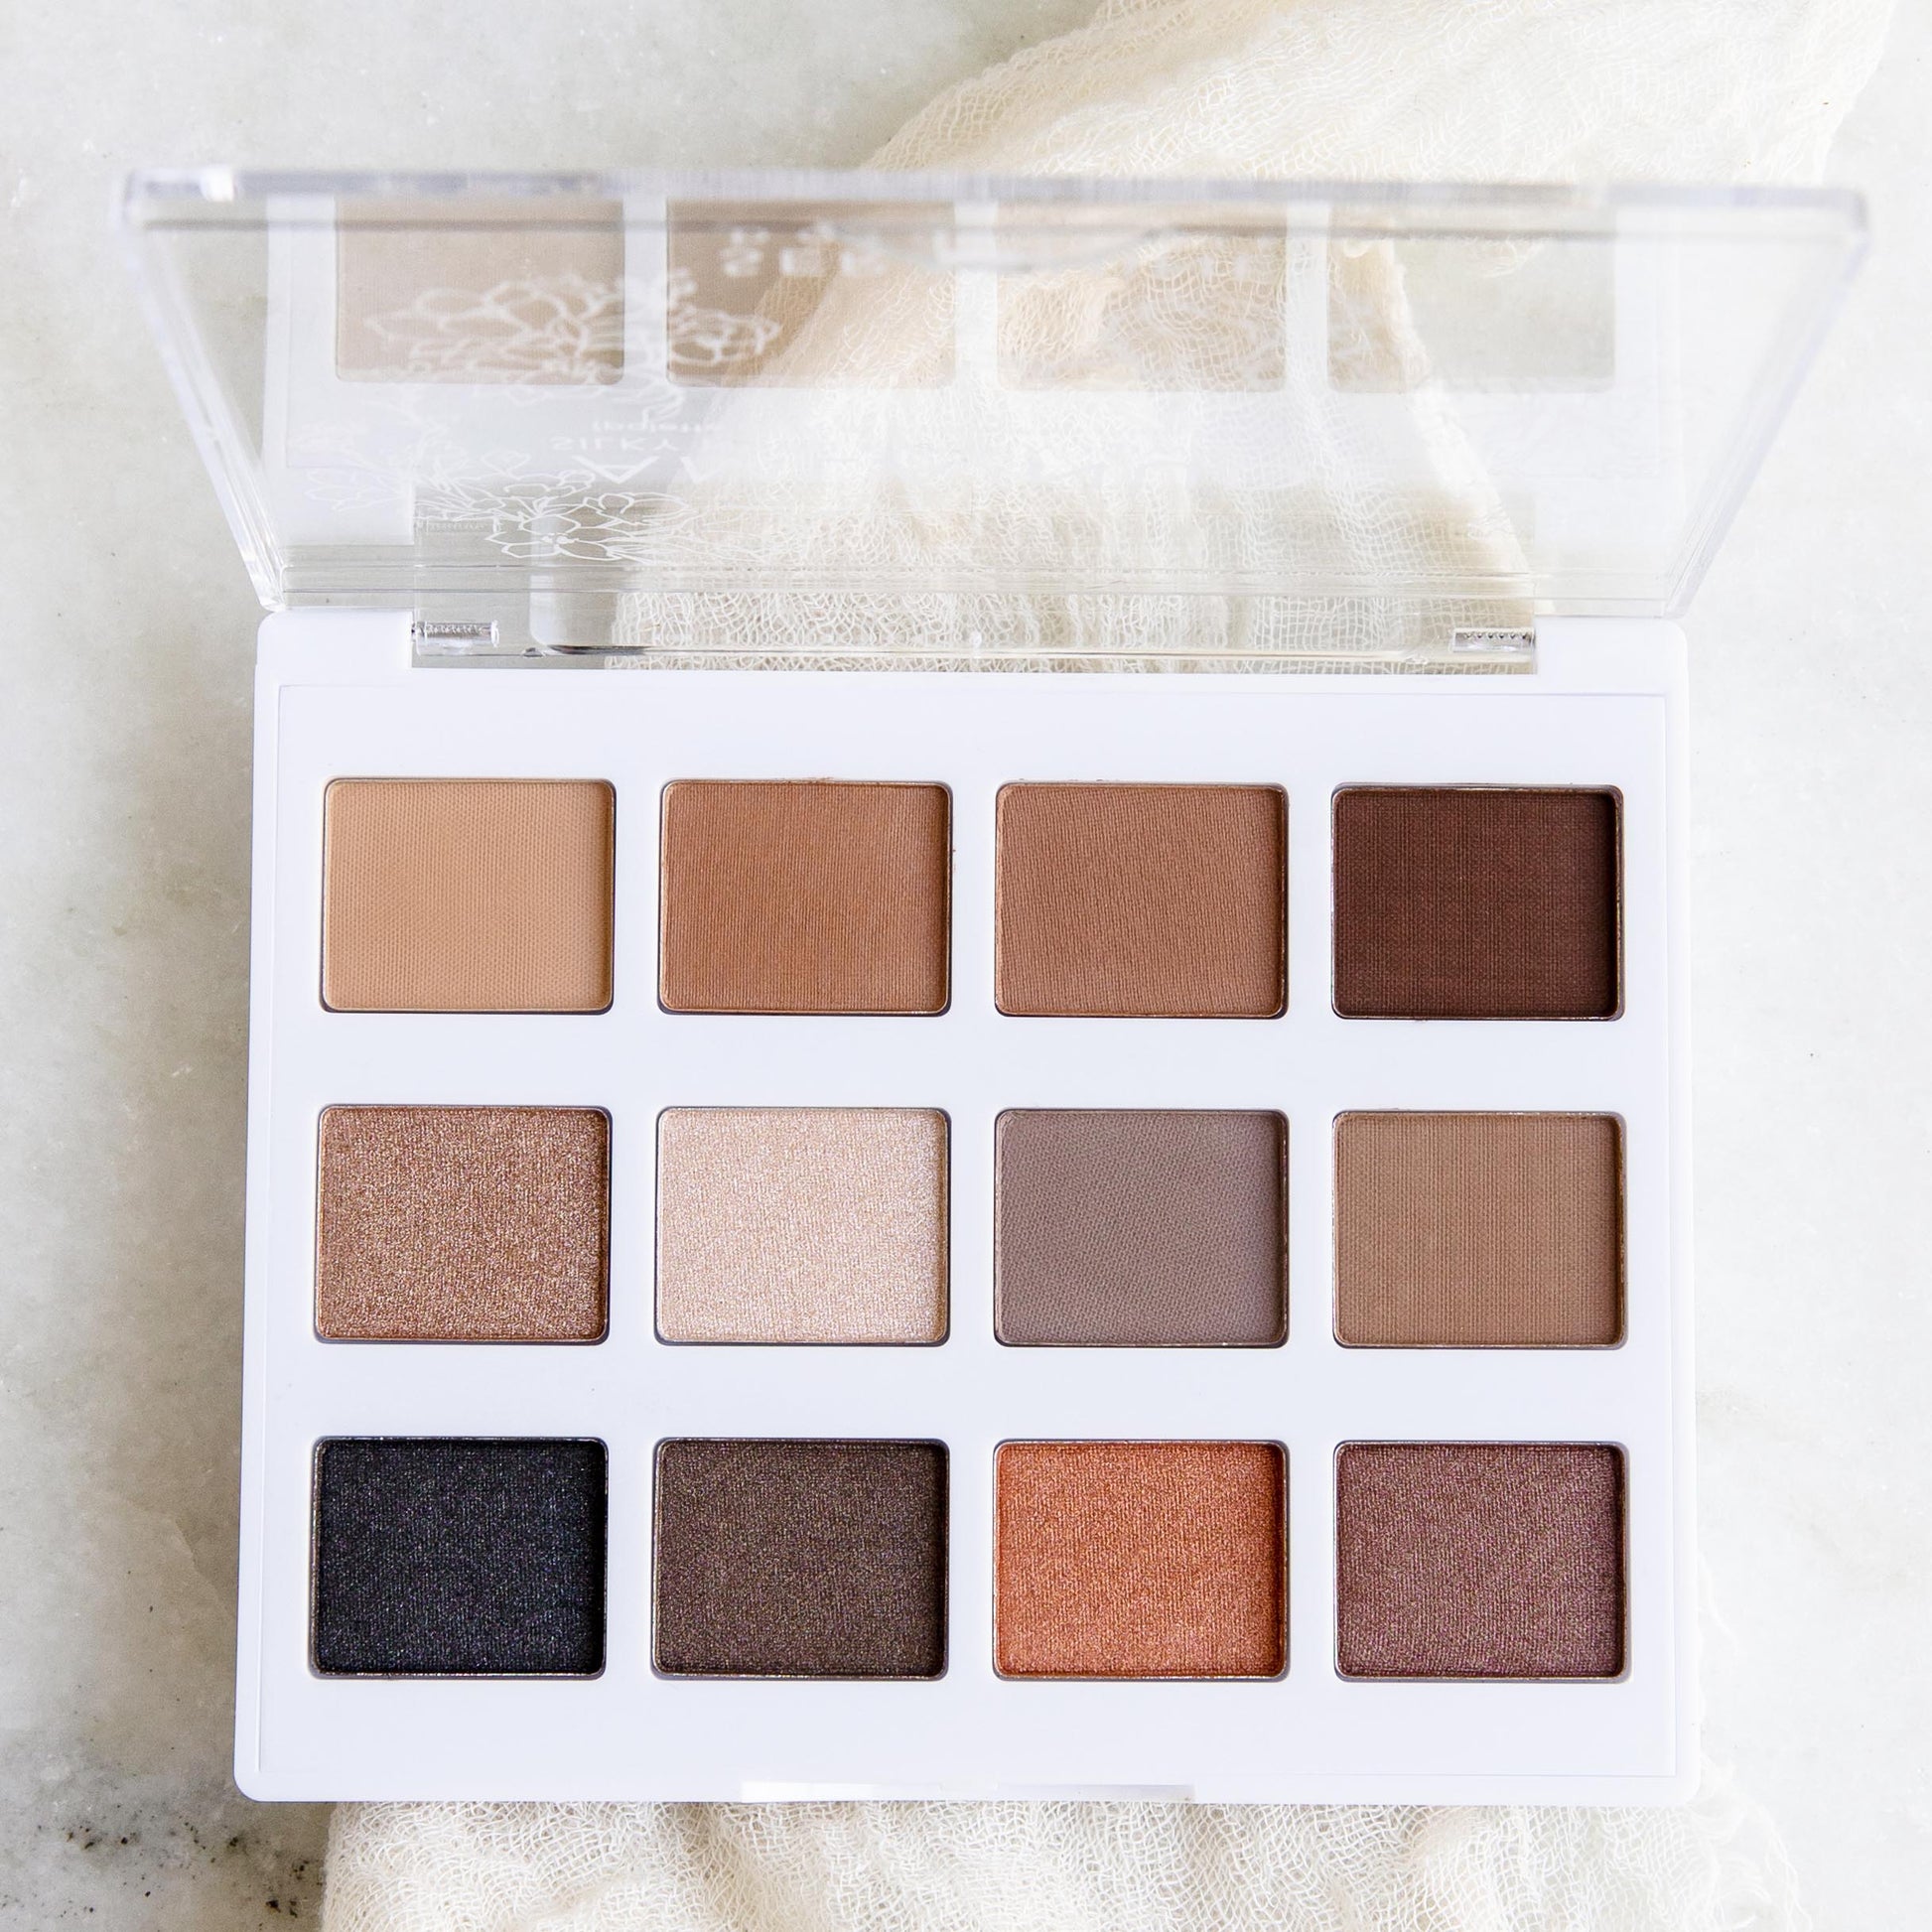 New Nude Eyeshadow Palette Makeup Set, - Shade & watches